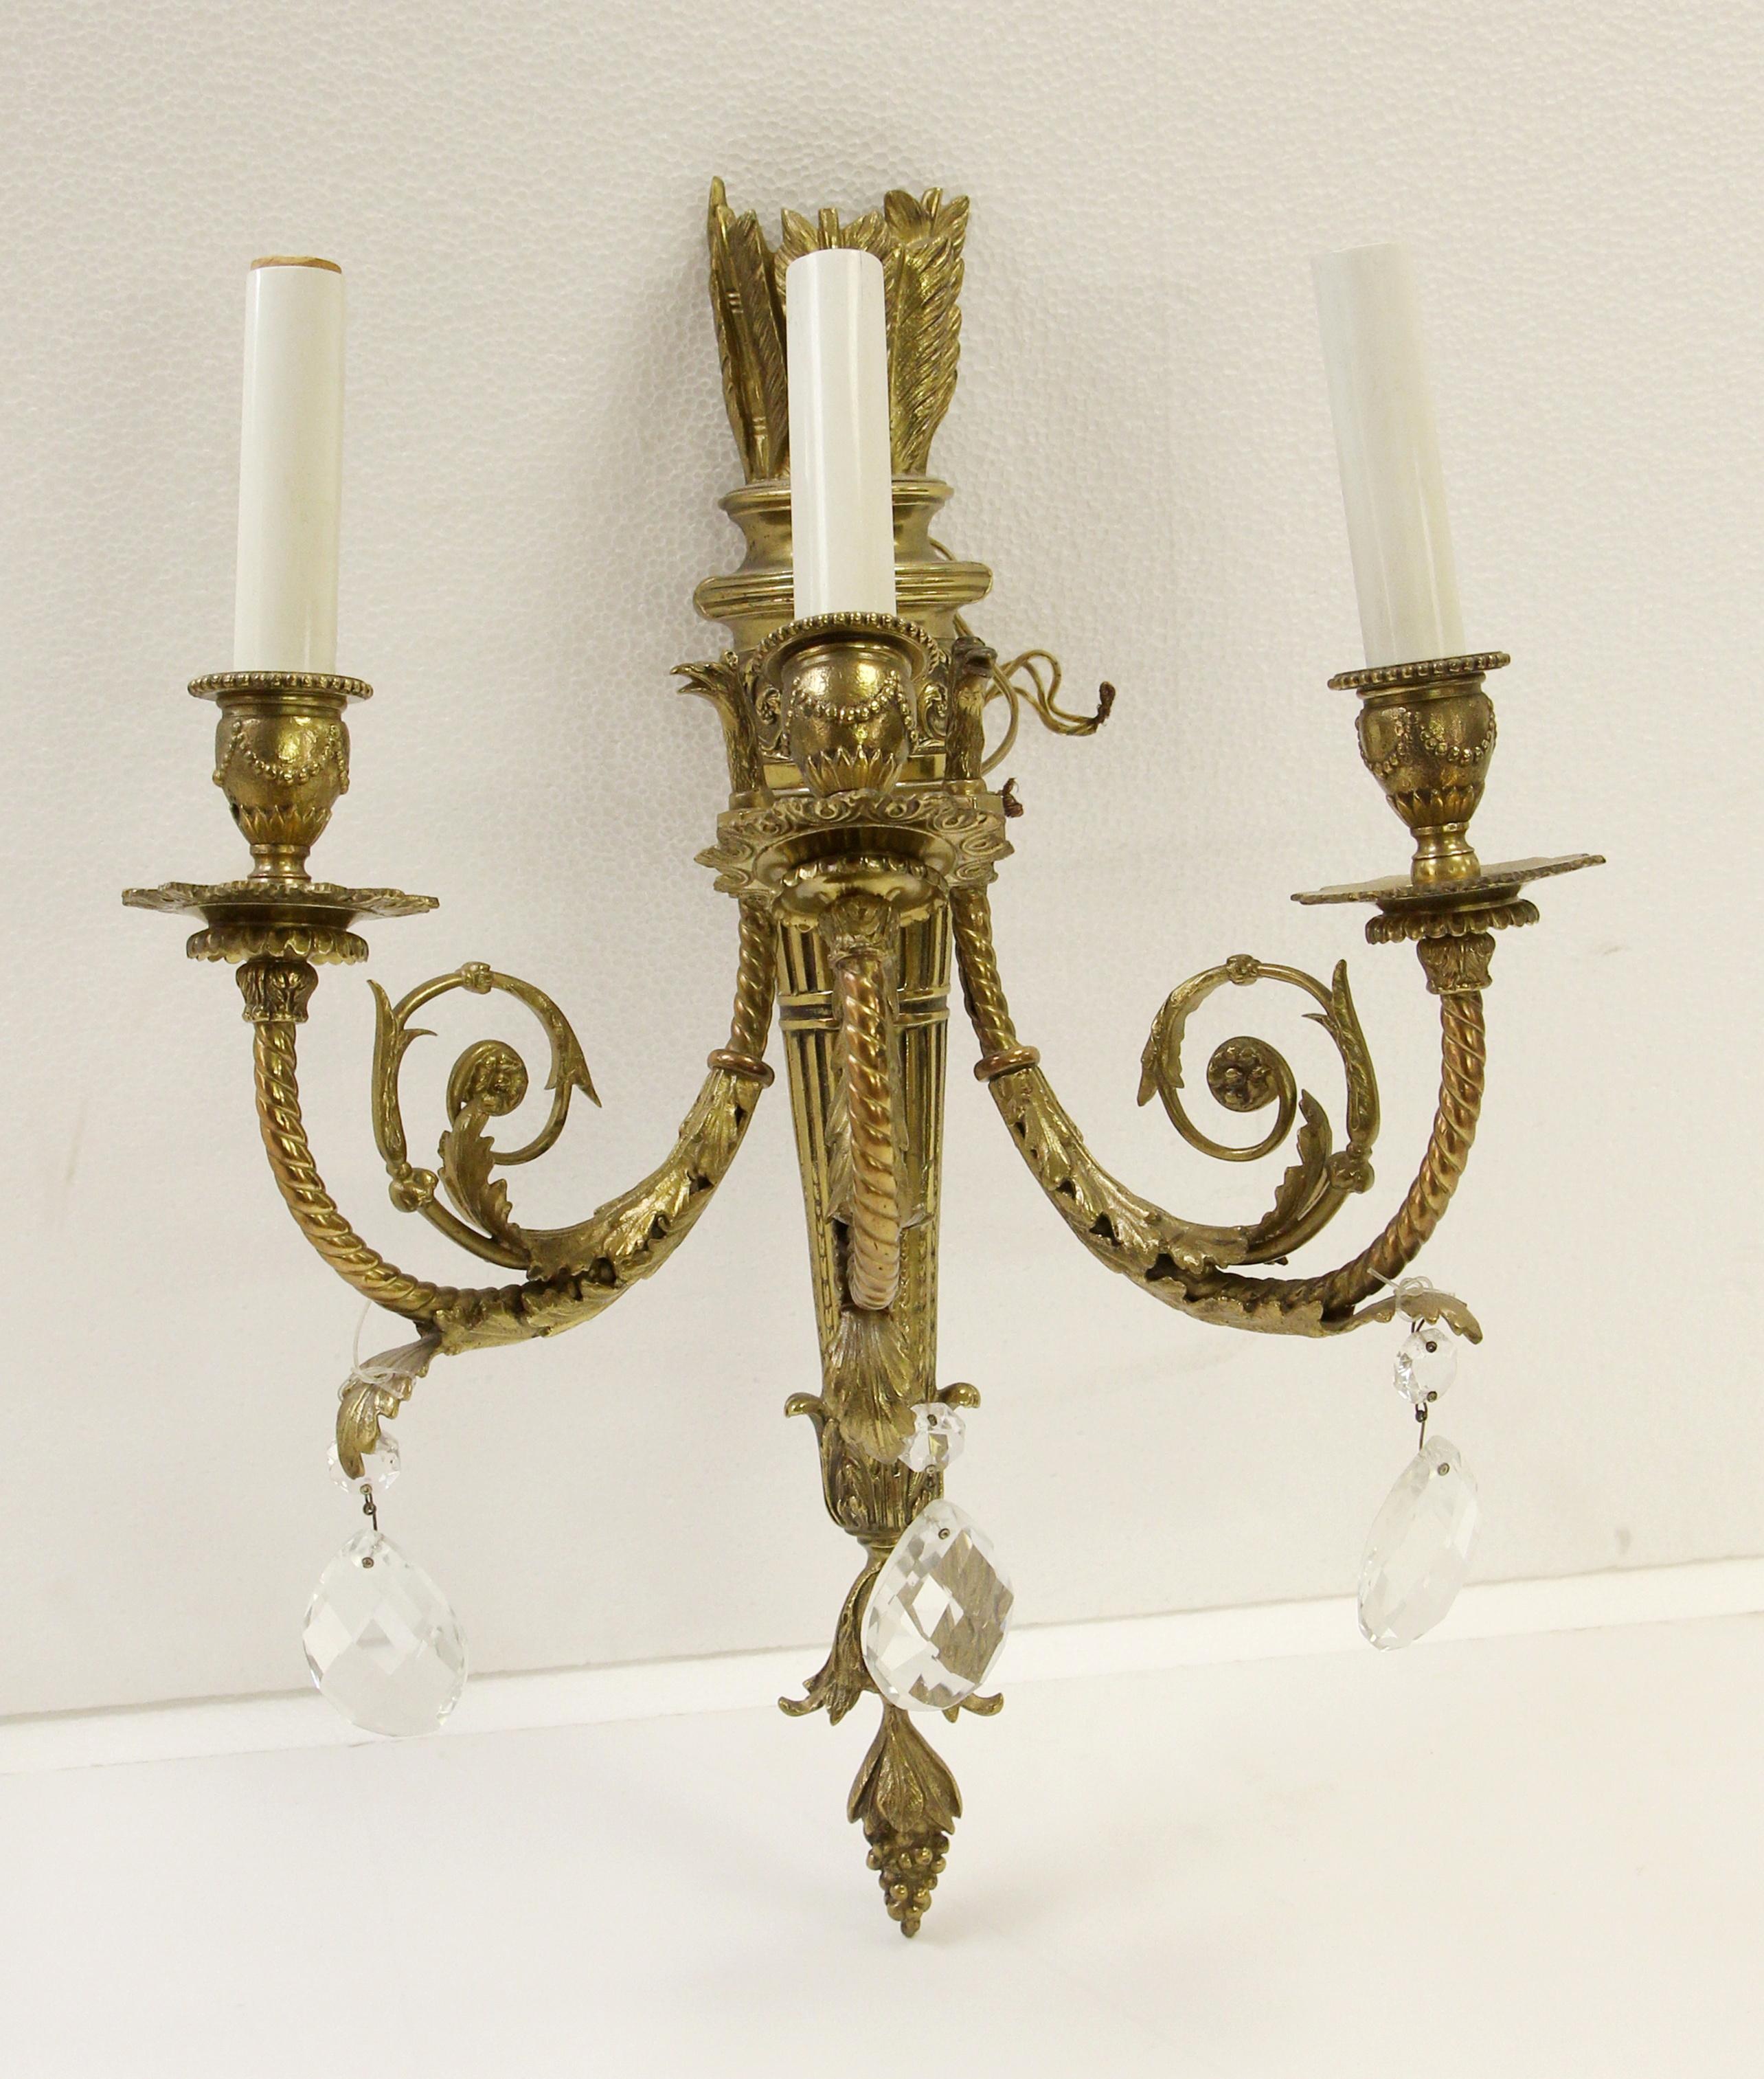 1930s pair of 3 arm highly ornate French style torche sconces. Made of brass with teardrop crystals on each arm. Original patina. Small quantity available at time of posting. Please inquire. Priced per pair. Please note, this item is located in our